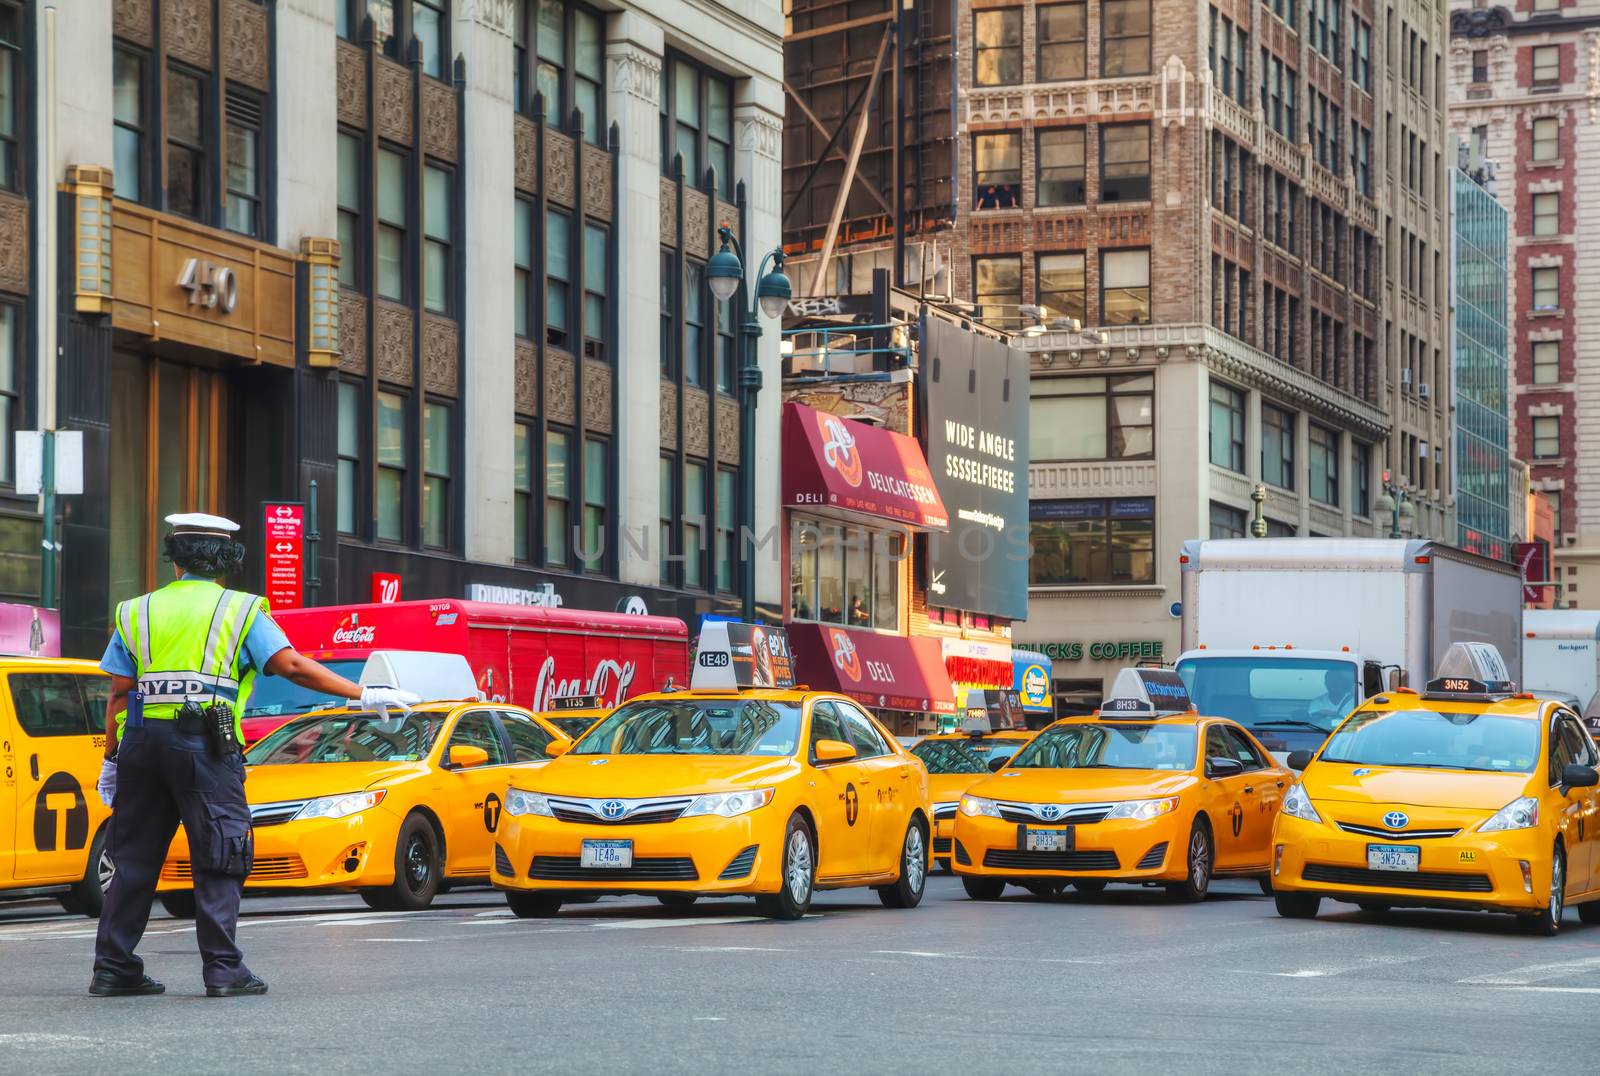 NEW YORK CITY - SEPTEMBER 4: Yellow taxis at the street on September 4, 2015 in New York. Yellow cars serve as taxis in NYC and are easy to spot among other vehicles because of their color.